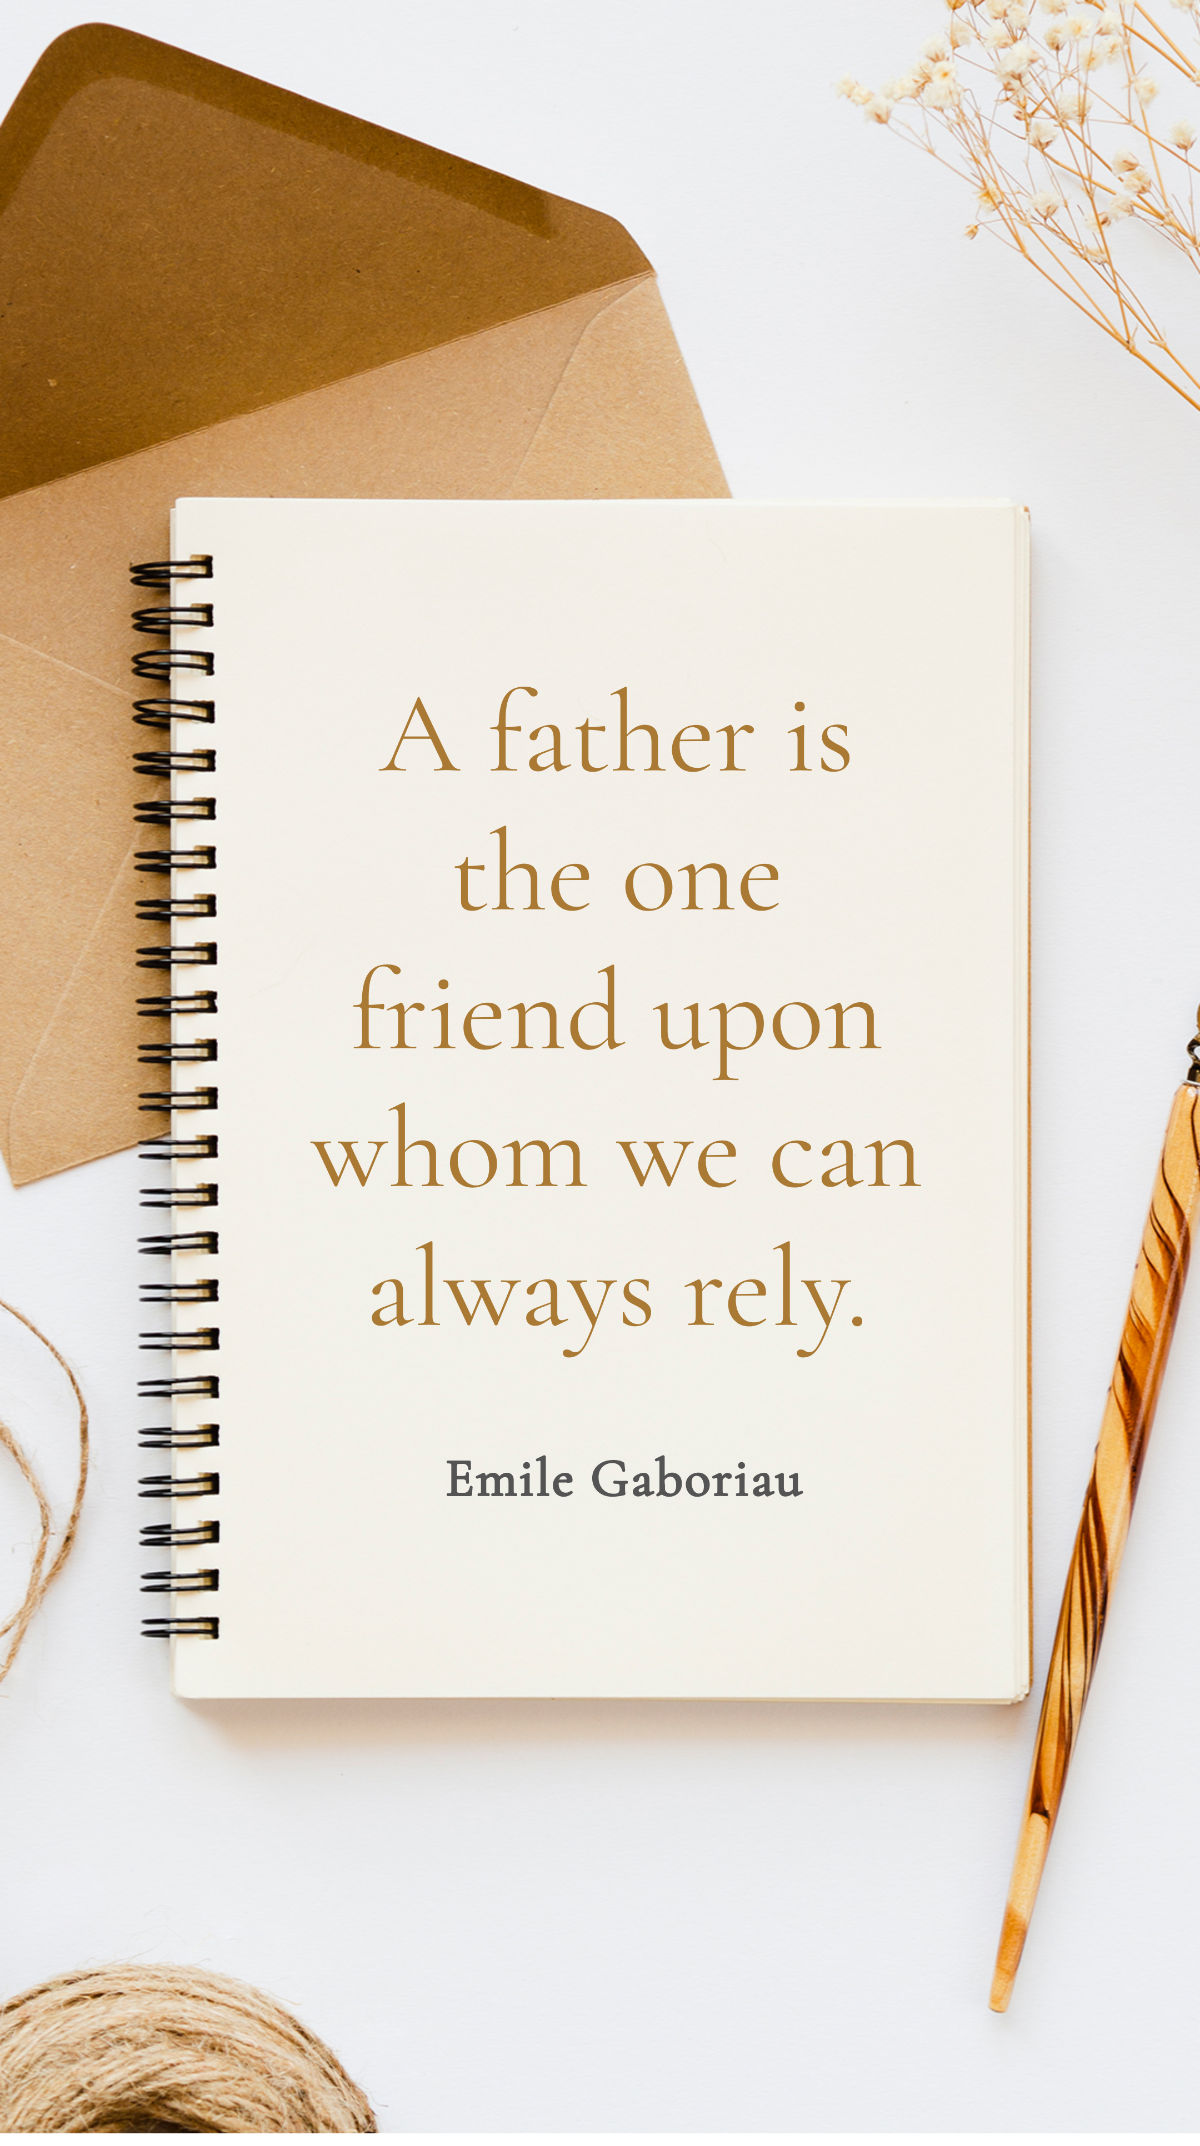 Emile Gaboriau - A father is the one friend upon whom we can always rely. Template